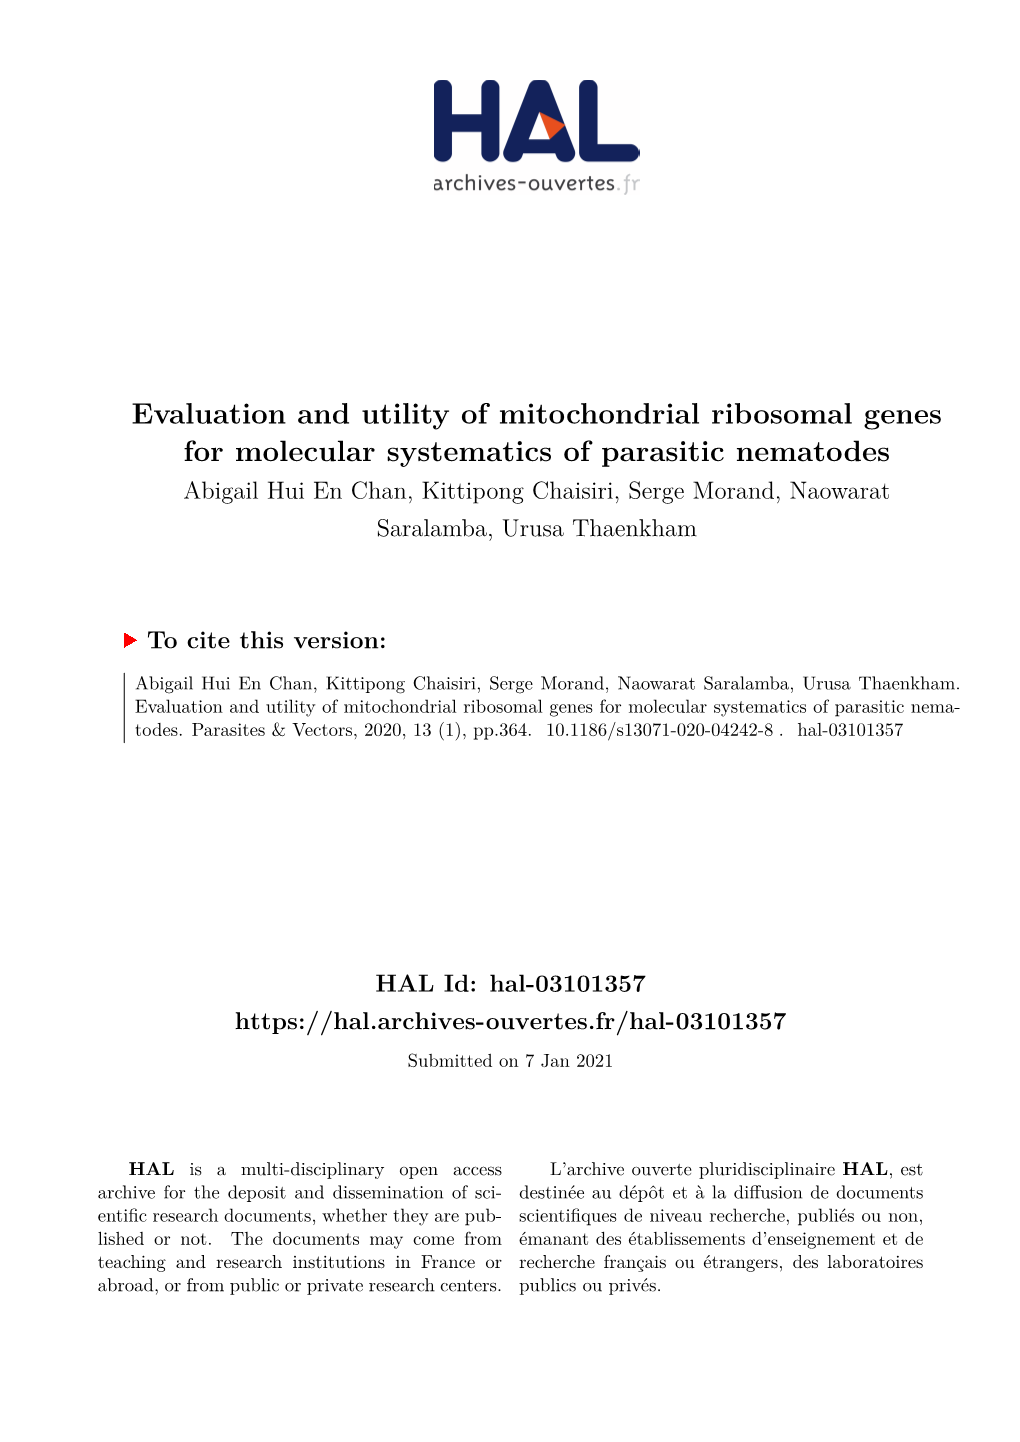 Evaluation and Utility of Mitochondrial Ribosomal Genes for Molecular